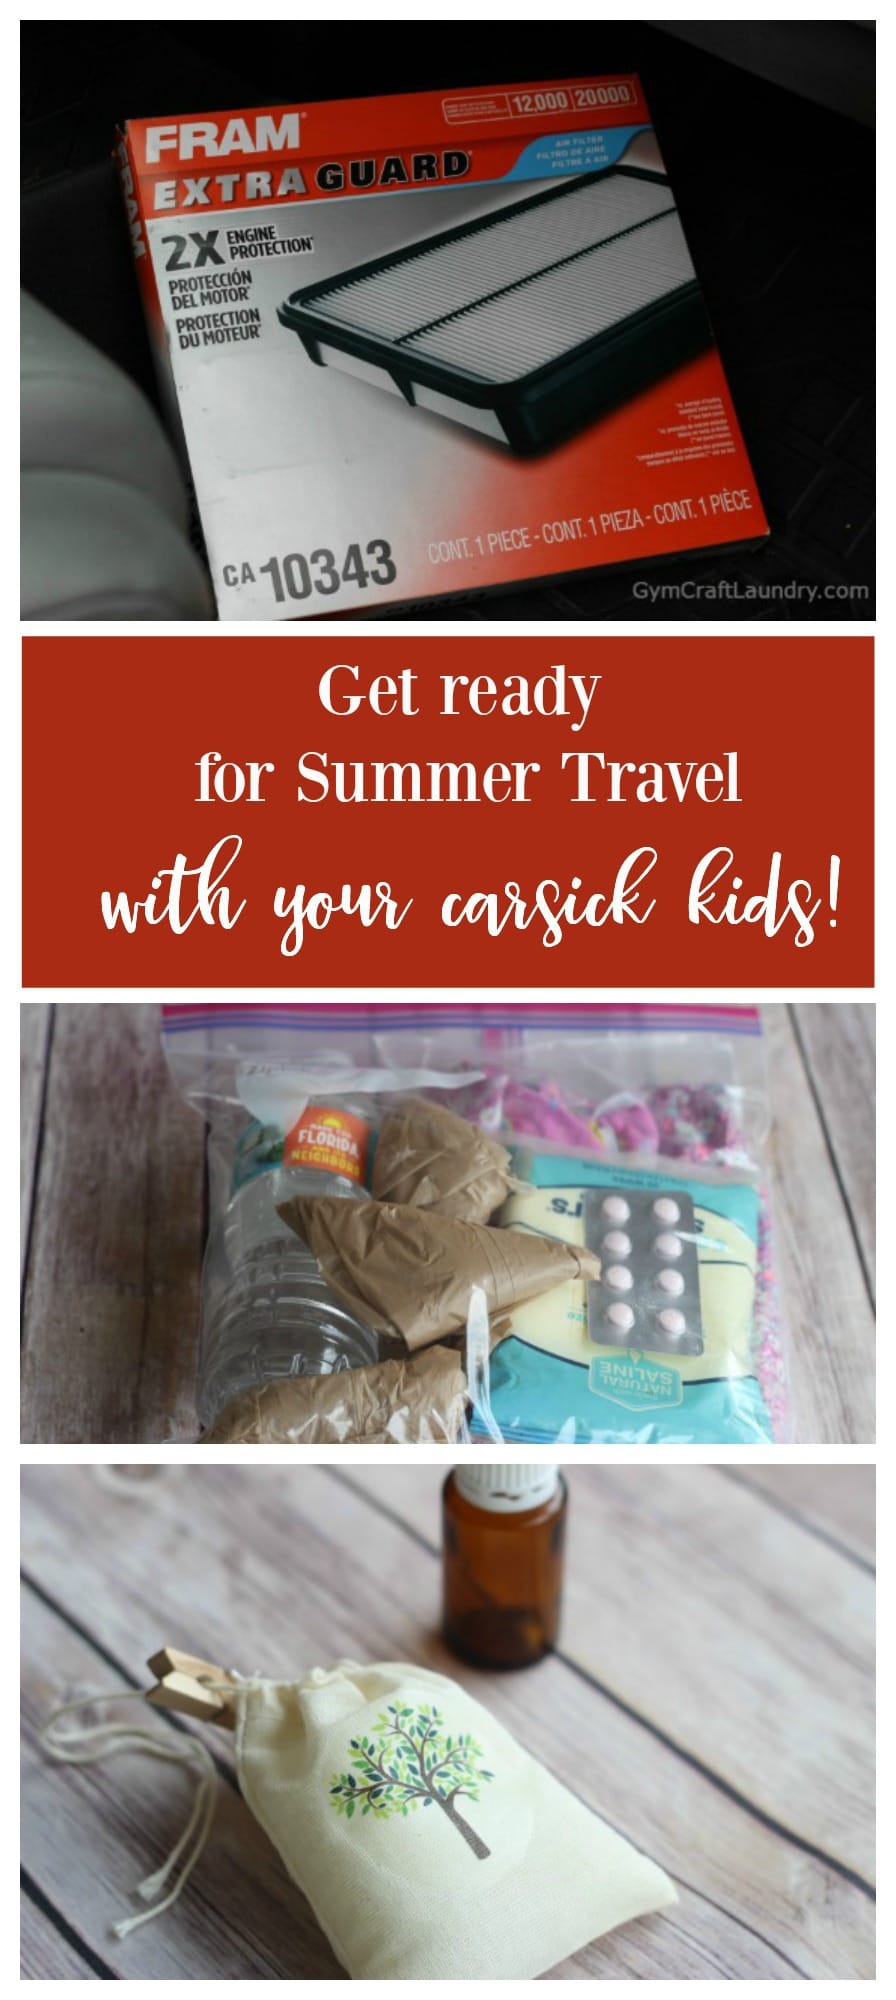 Get ready for Summer travel and roadtrips with carsick kids